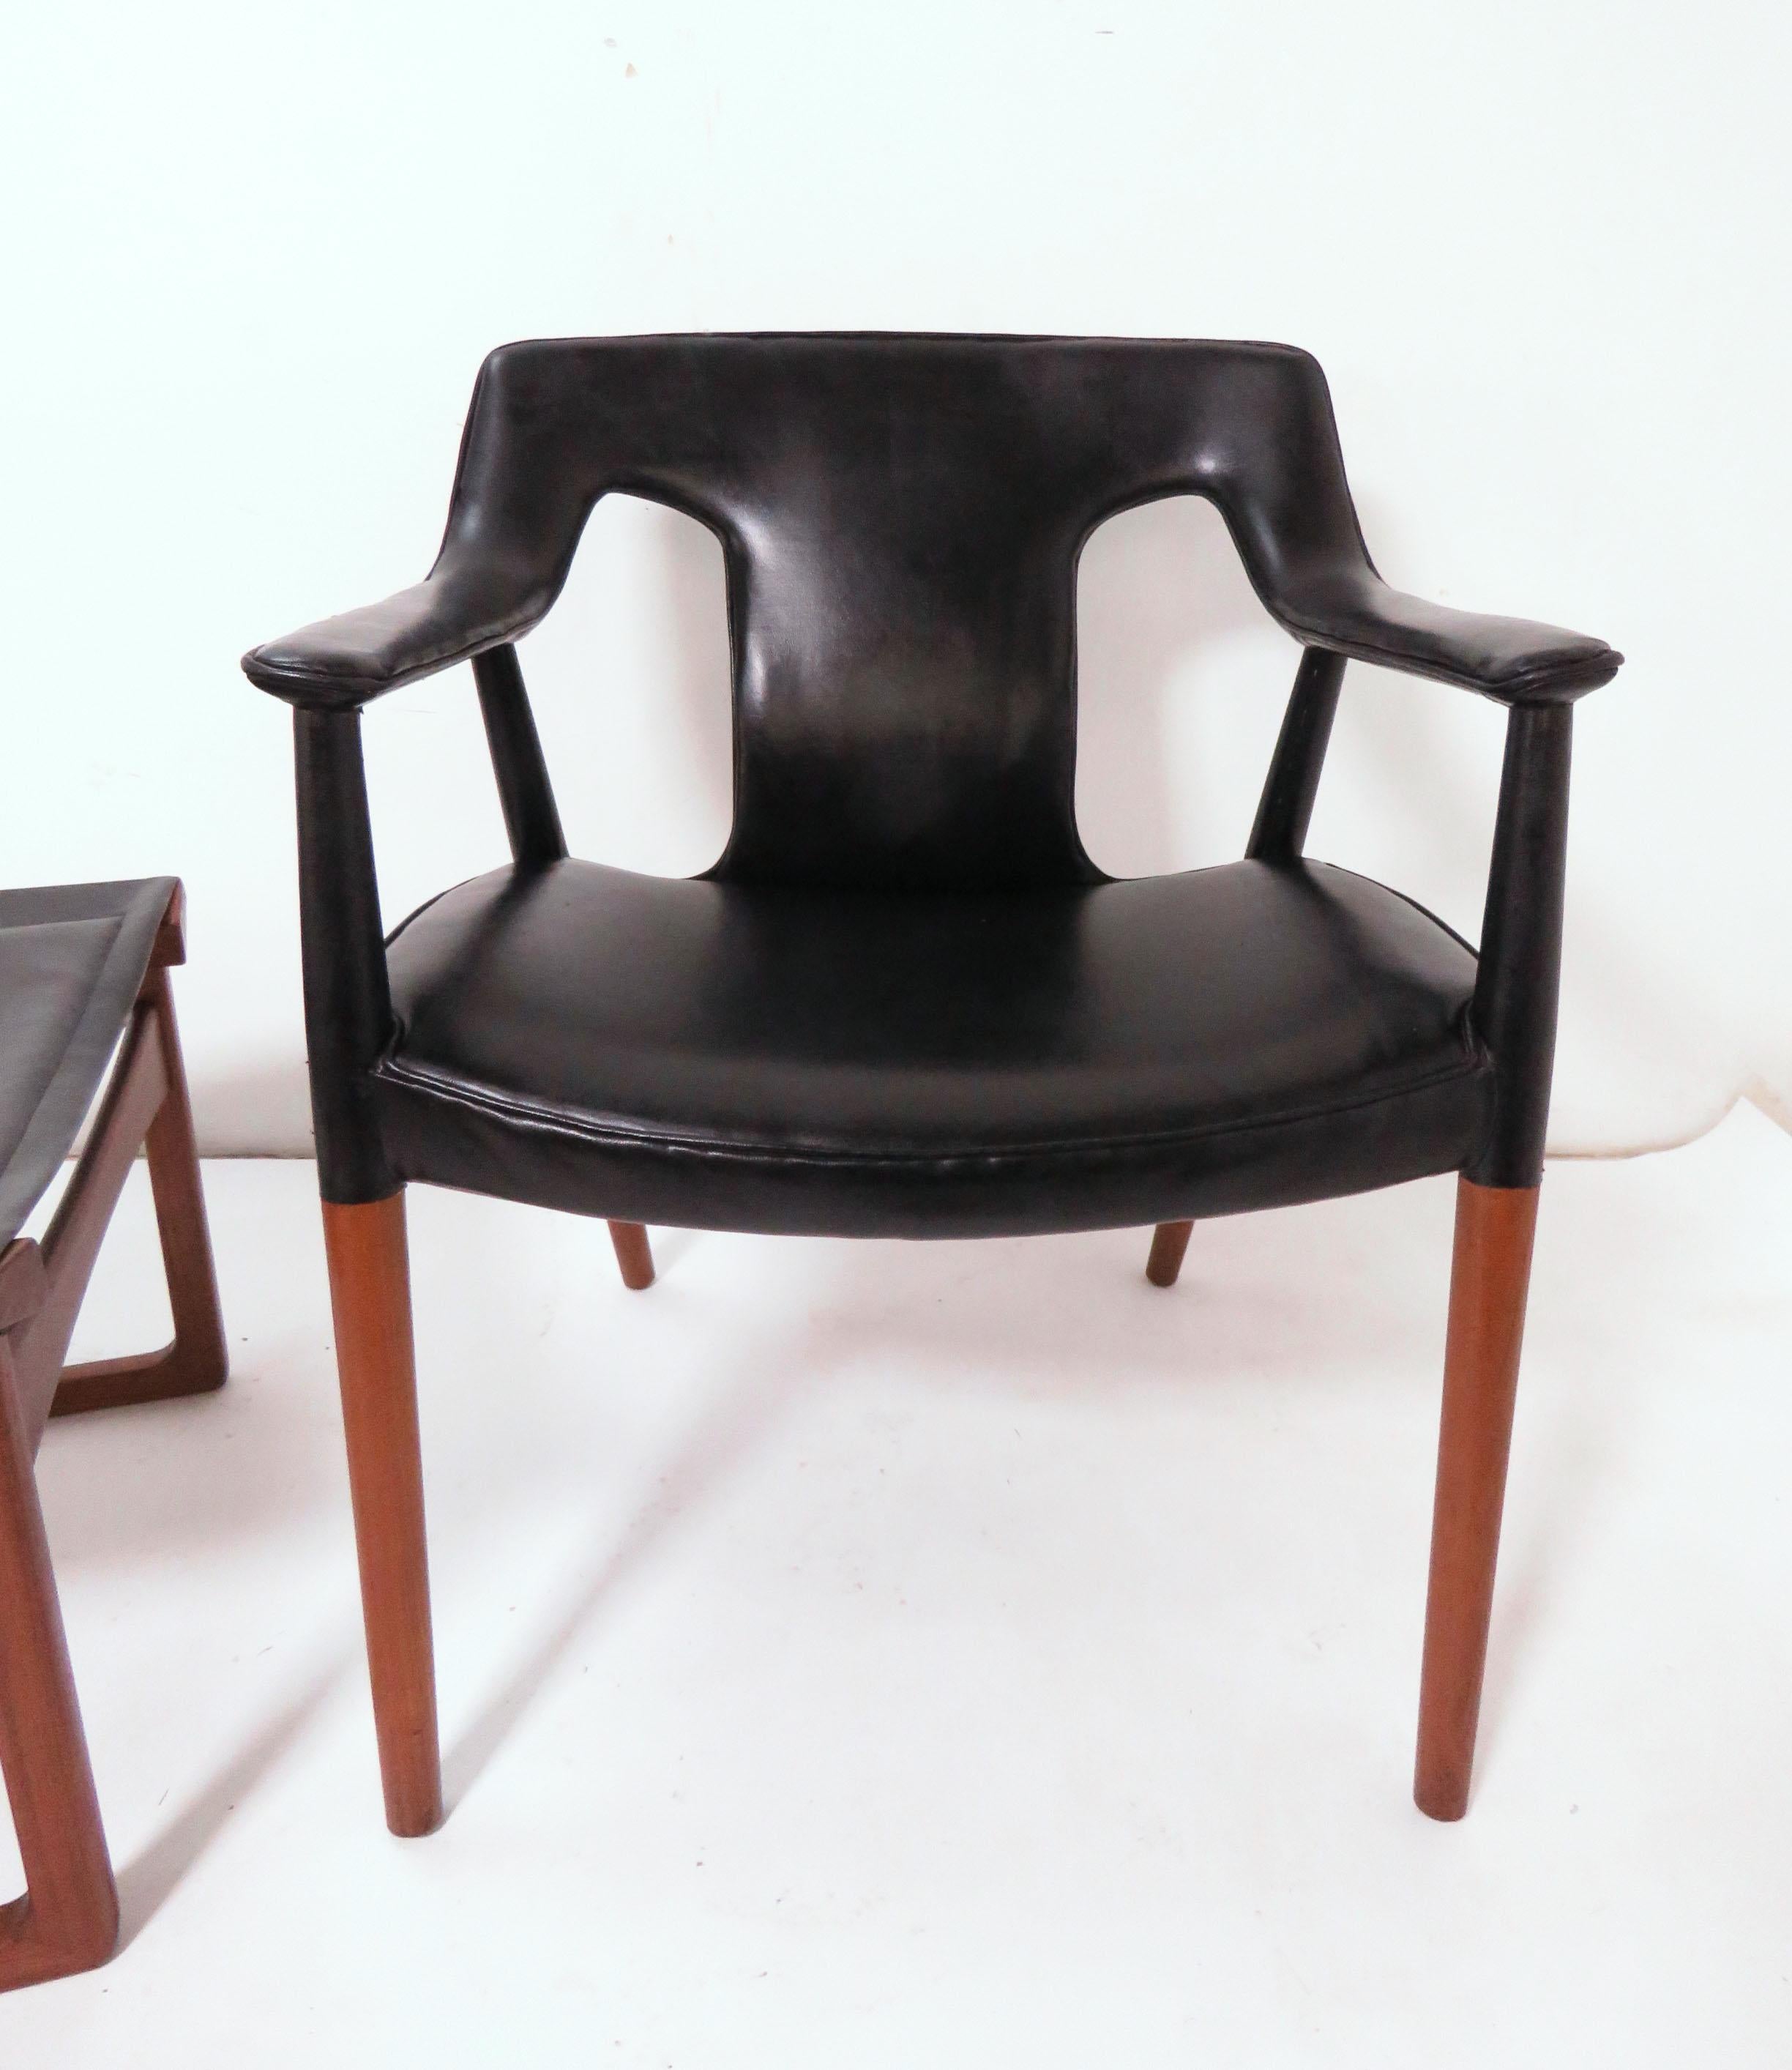 Mid-20th Century Ejner Larsen and A. Bender Madsen Danish Teak Lounge Chair and Ottoman Set For Sale